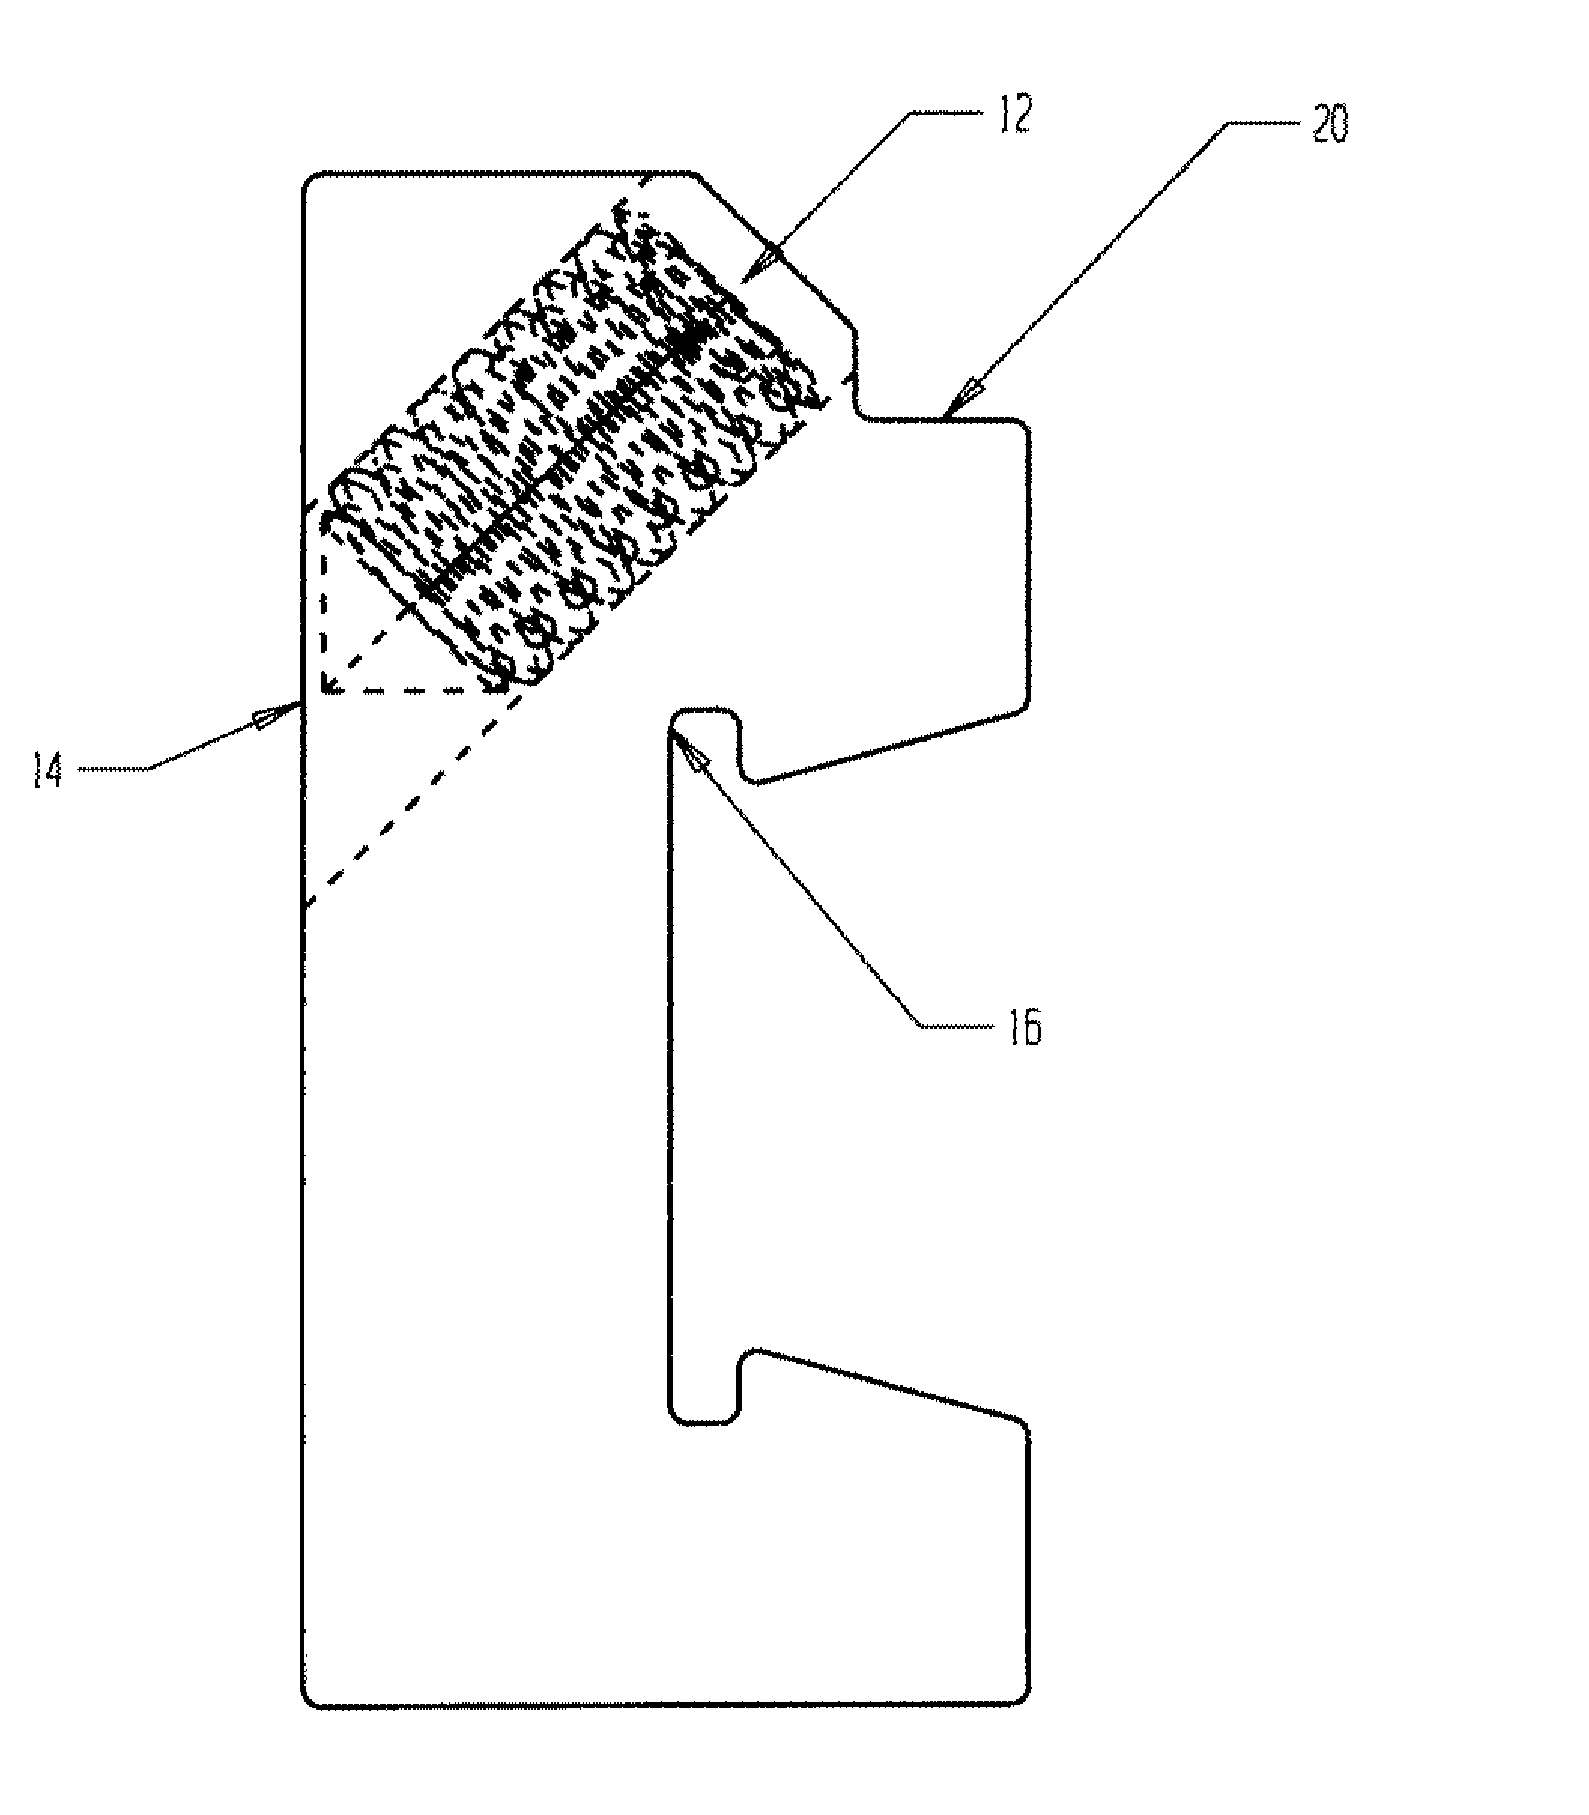 Method of installing an anti-siphon assembly